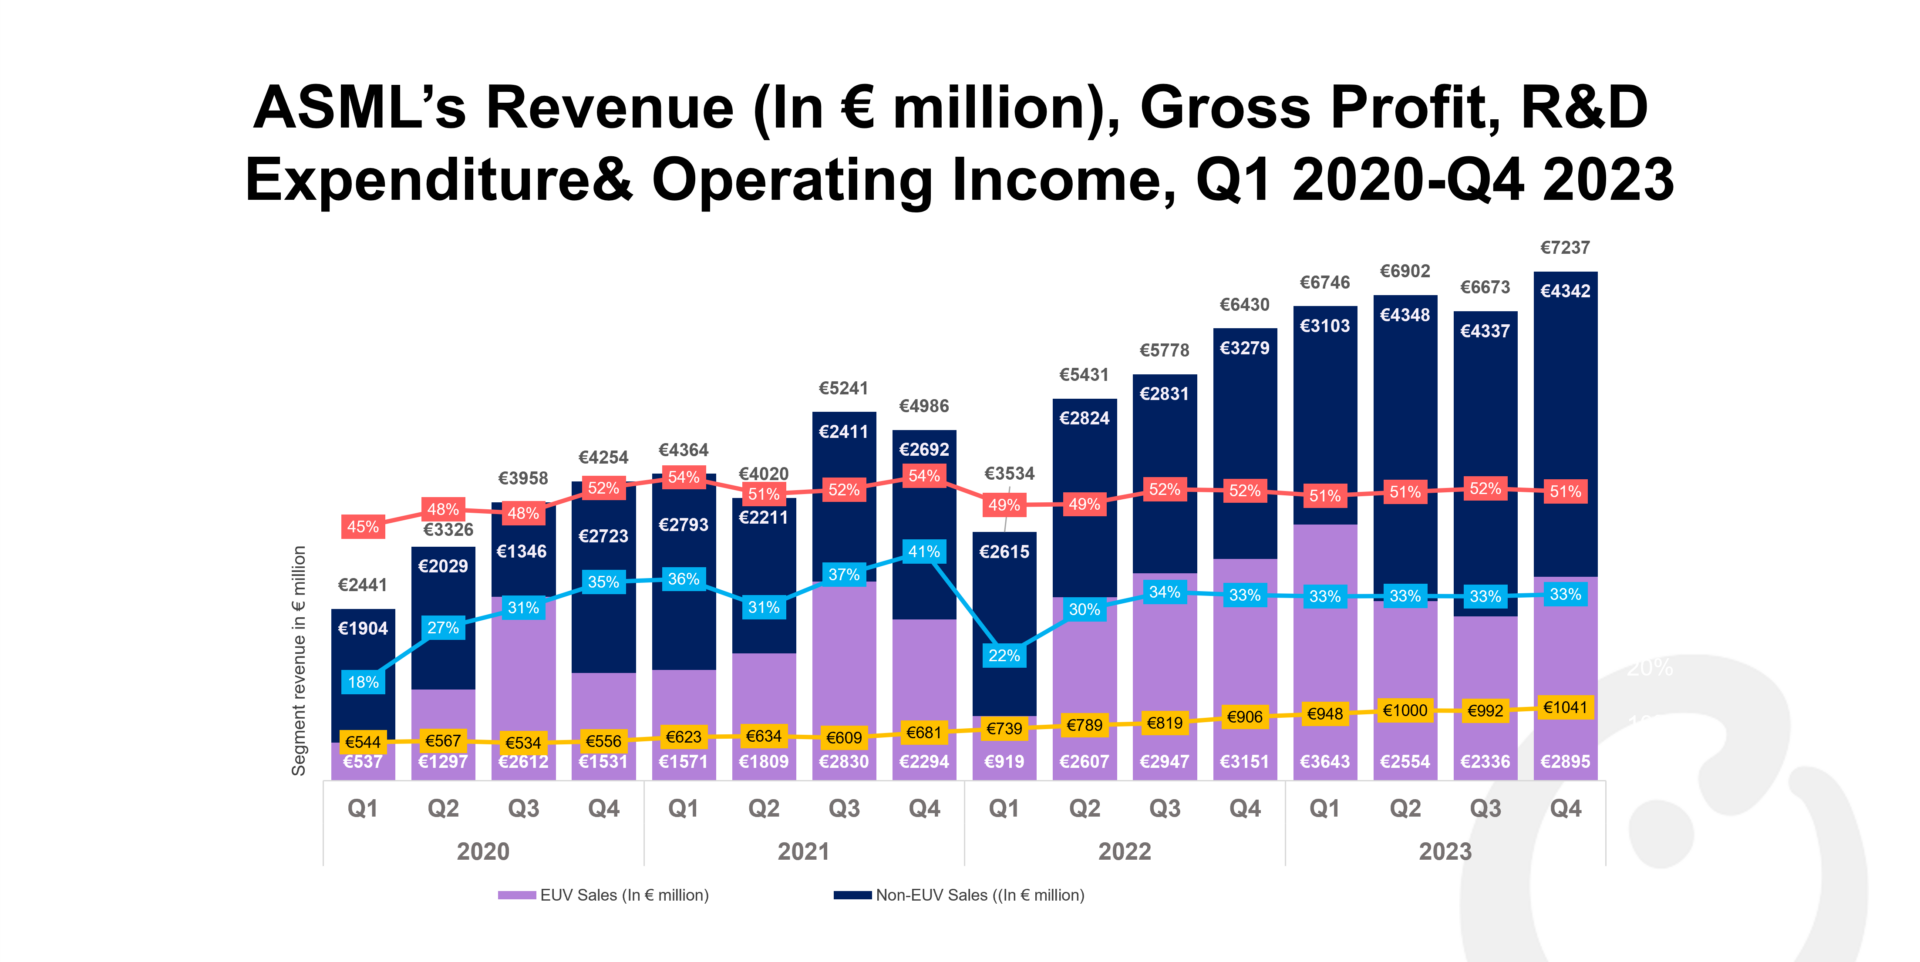 A chart showing ASML’s Revenue (In € million), Gross Profit, R&D Expenditure & Operating Income, Q1 2020-Q4 2023